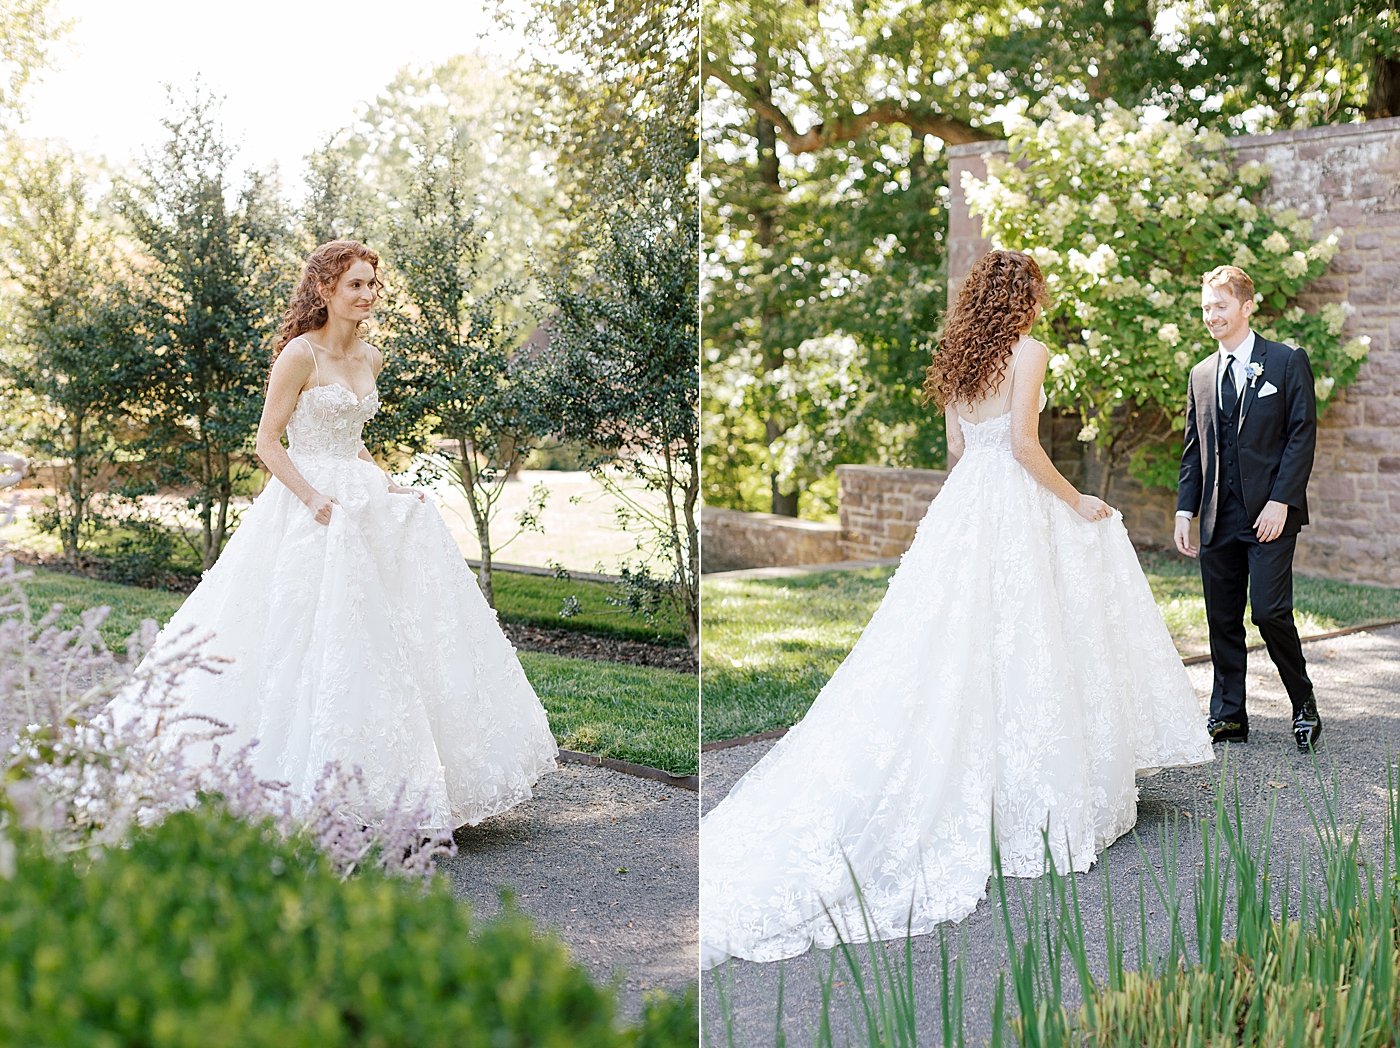 Side by side images of bride walking up to groom for their first look during Tyler Gardens Wedding | Image by Hope Helmuth Photography